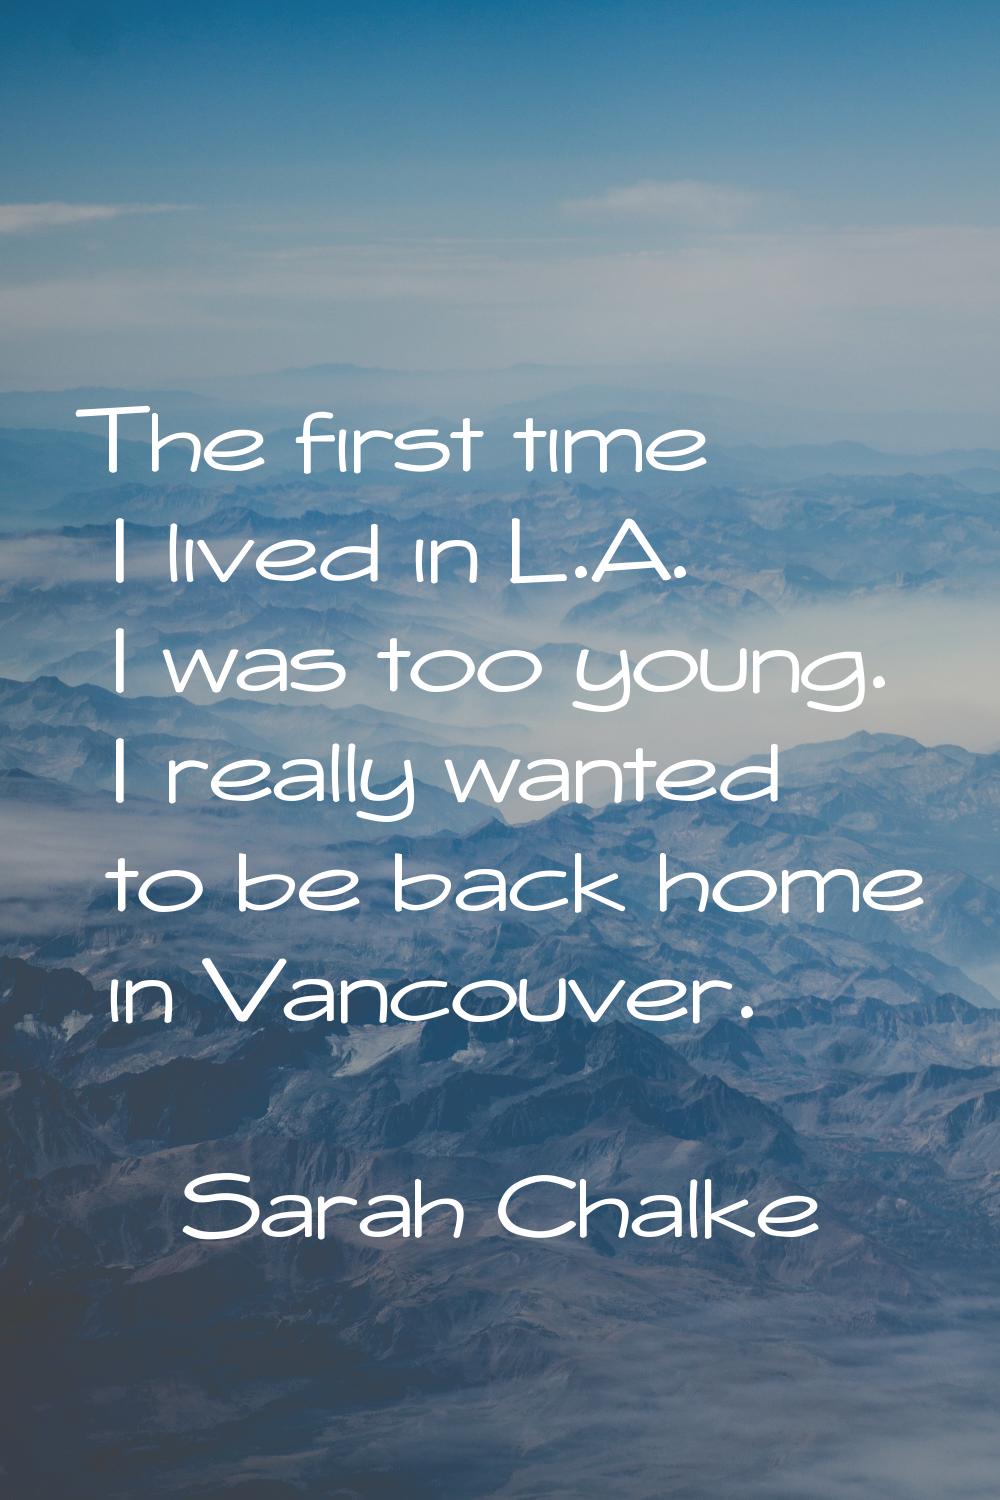 The first time I lived in L.A. I was too young. I really wanted to be back home in Vancouver.